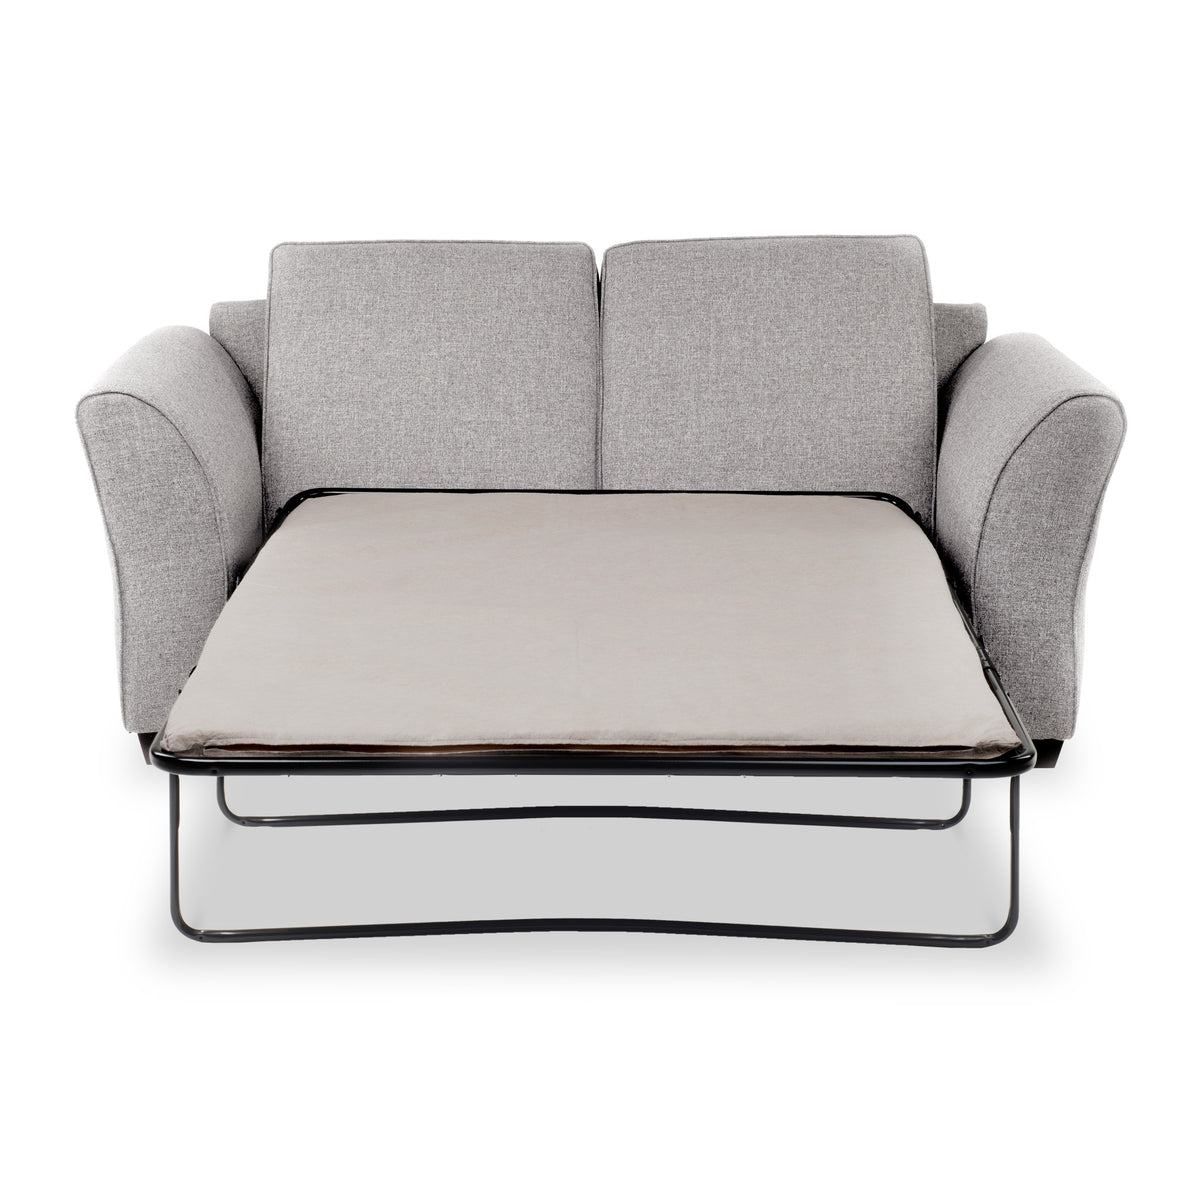 St Ives Corner Sofa Bed in Silver by Roseland Furniture